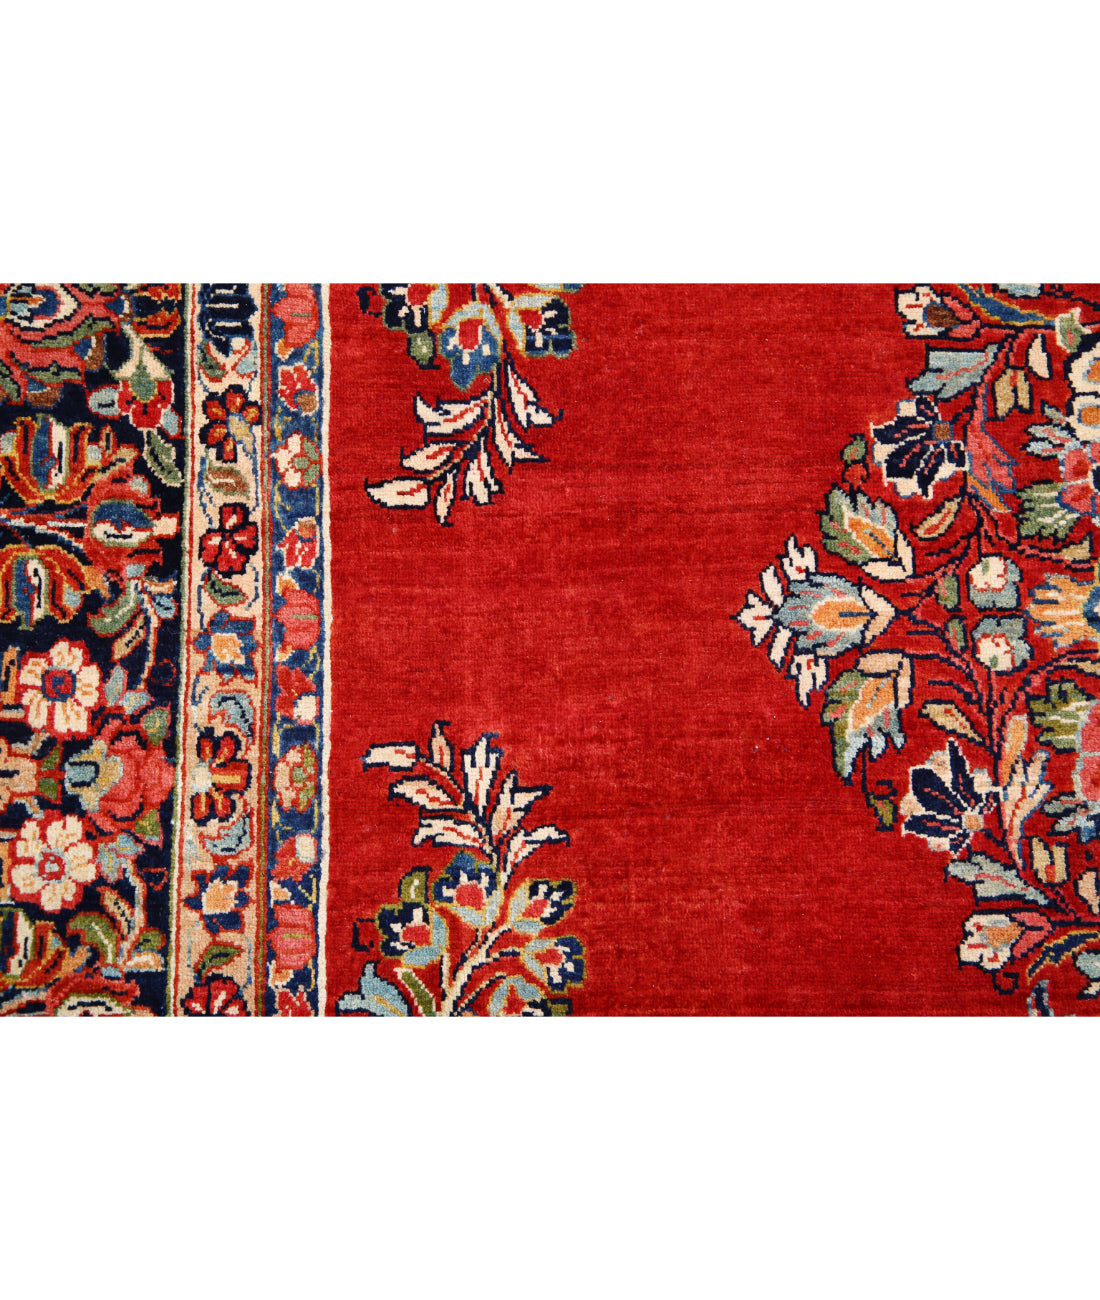 Hand Knotted Persian Kerman Wool Rug - 8'4'' x 11'4'' 8'4'' x 11'4'' (250 X 340) / Red / Blue